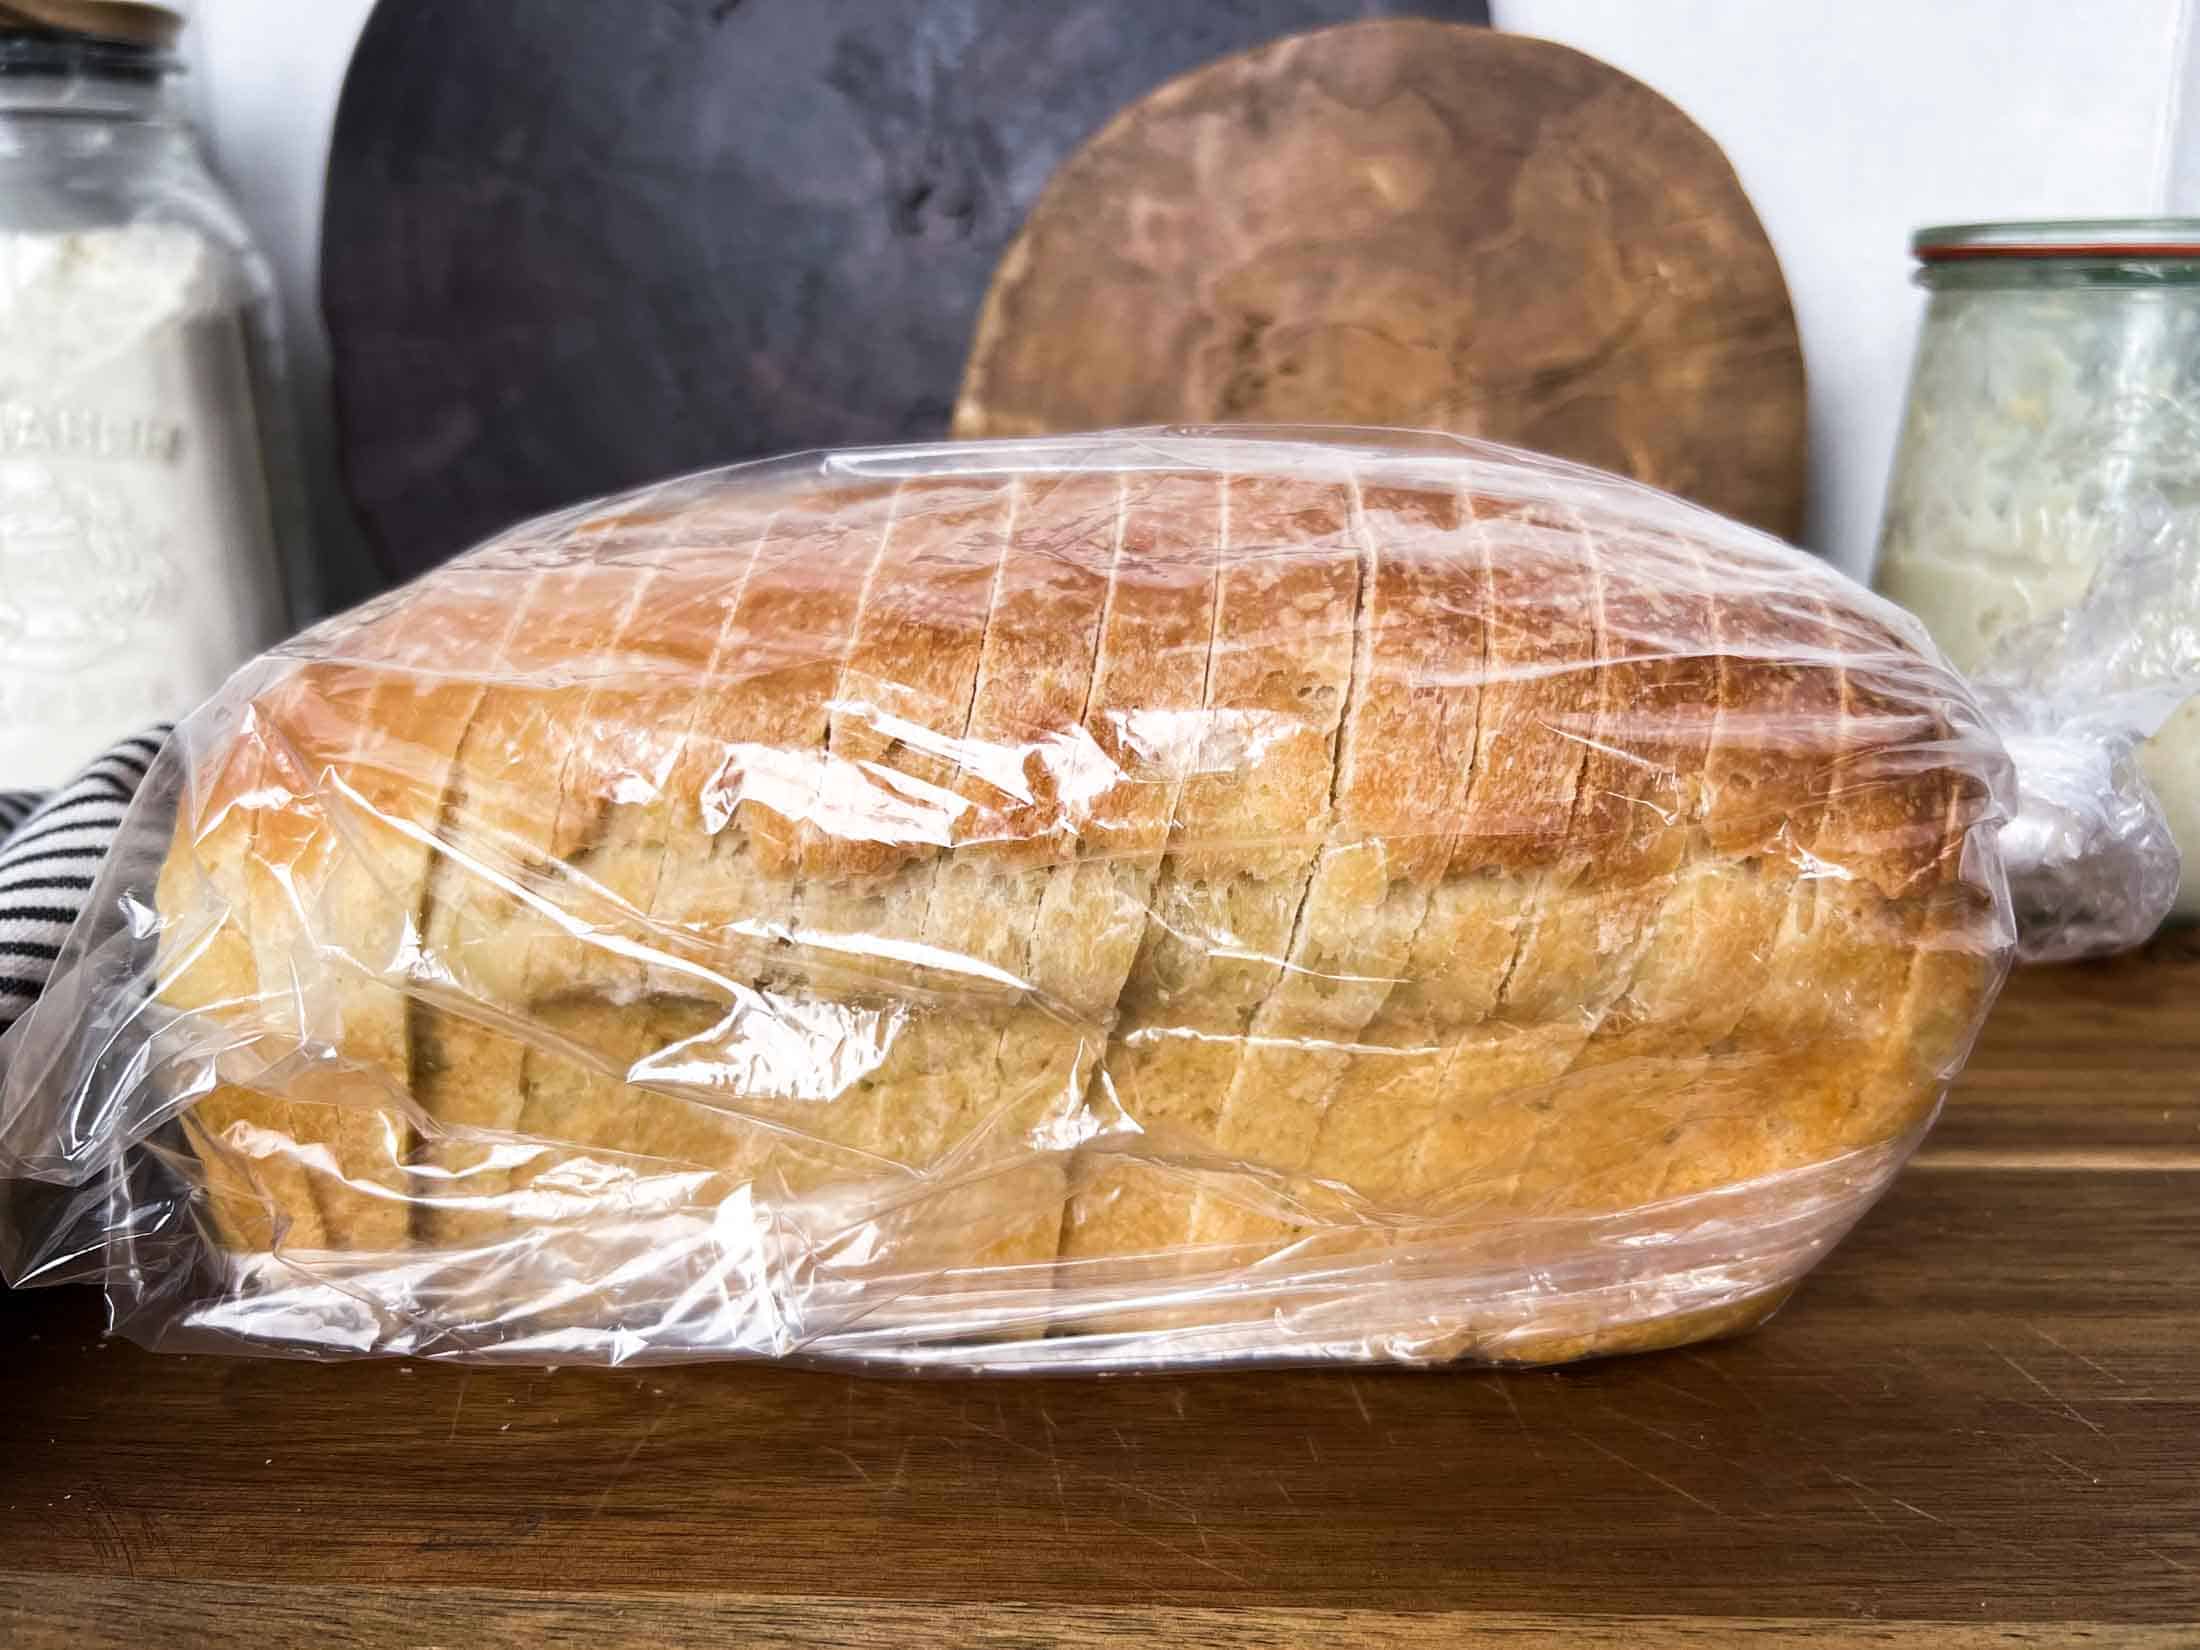 Sourdough sandwich loaf sliced and placed in a plastic bag.